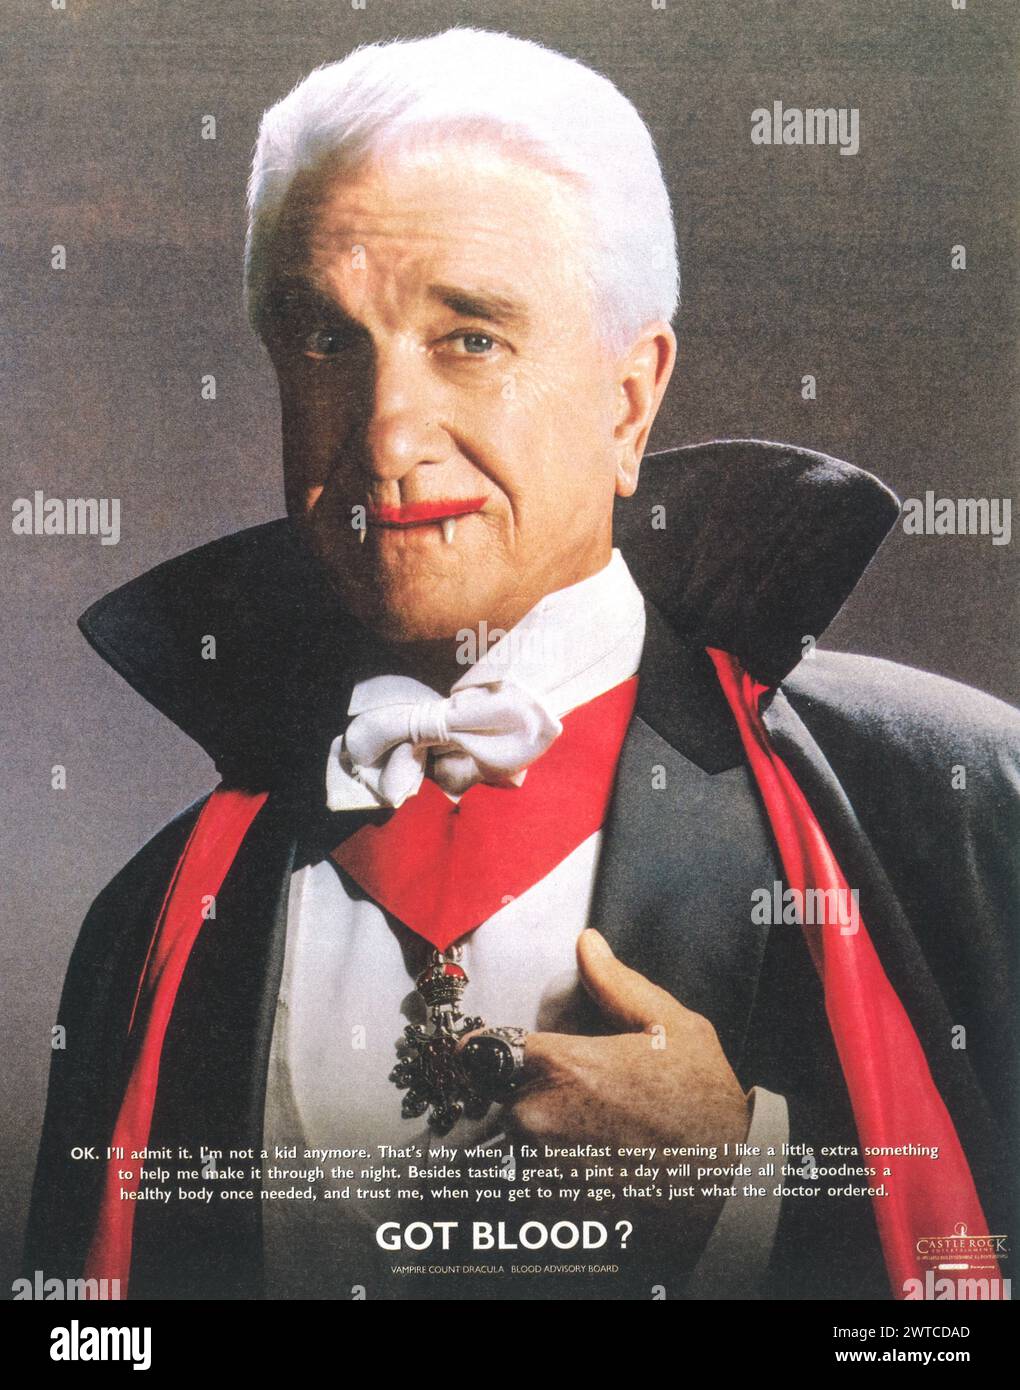 1995  DRACULA Got blood - 'Dead and loving it' film poster - comedy horror film directed by Mel Brooks, starring Leslie Nielsen Stock Photo